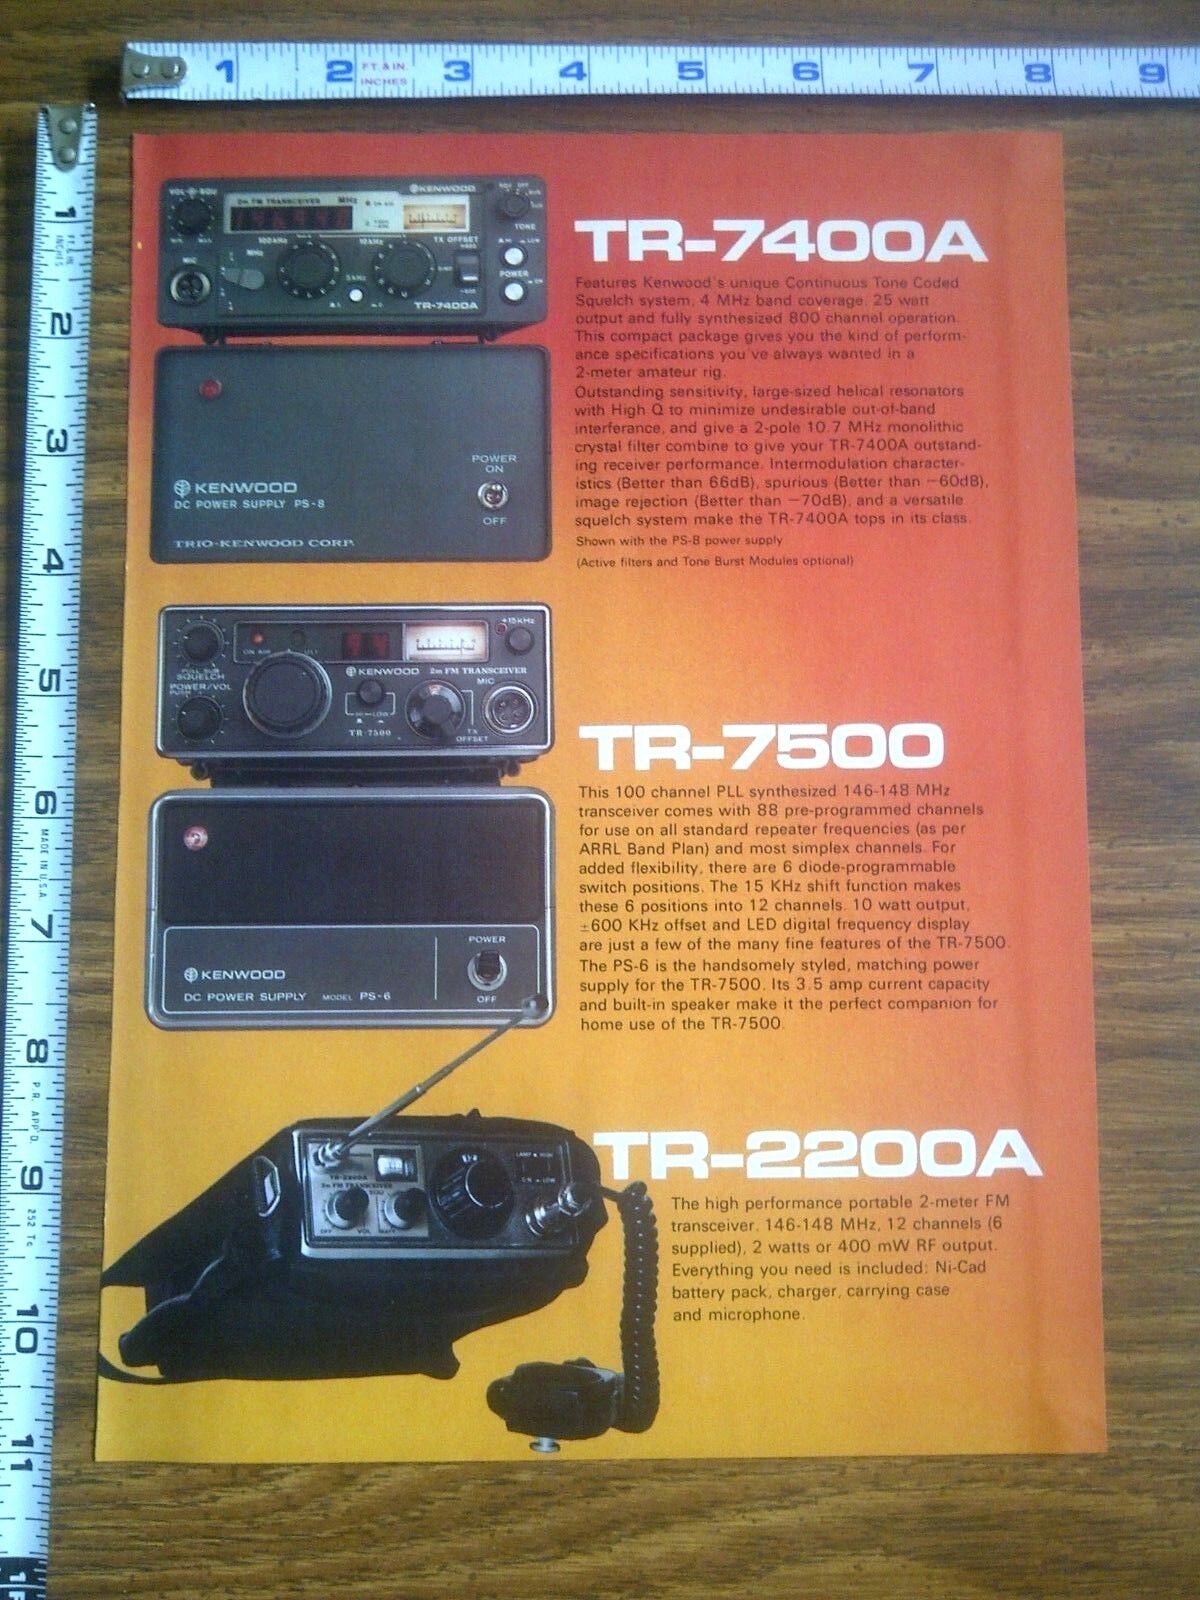 1977 ad page - Kenwood TR-7400A  TR-7500 T-559D Radio Transceiver  ADVERTISING 1